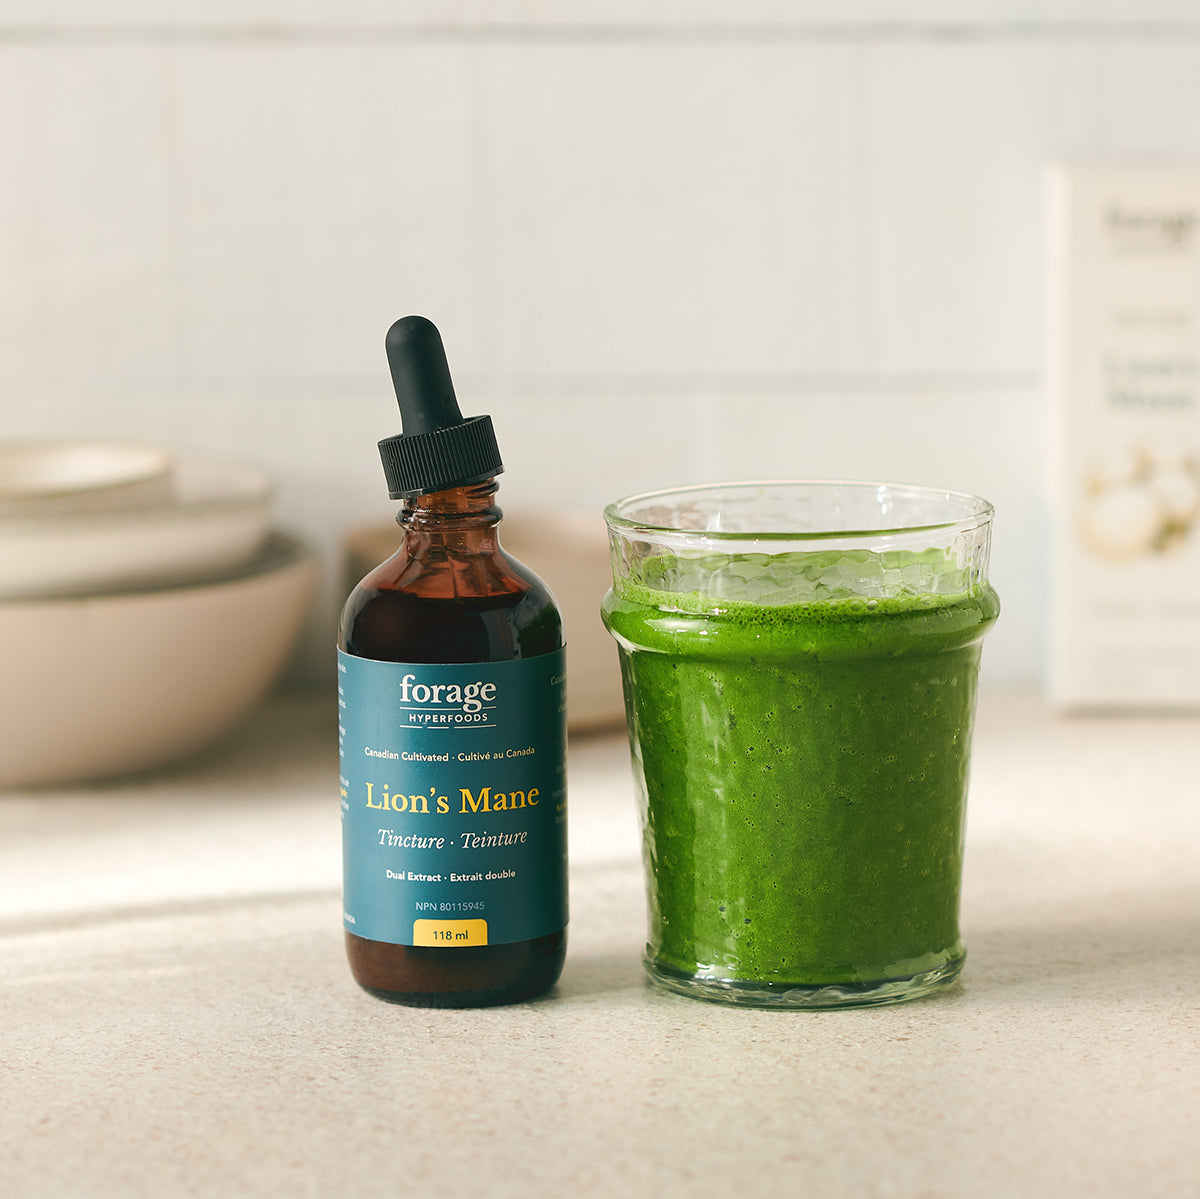 A tincture bottle of Original Lion's Mane Tincture from Forage Hyperfoods next to a healthy green smoothie, showing the products ease of use.